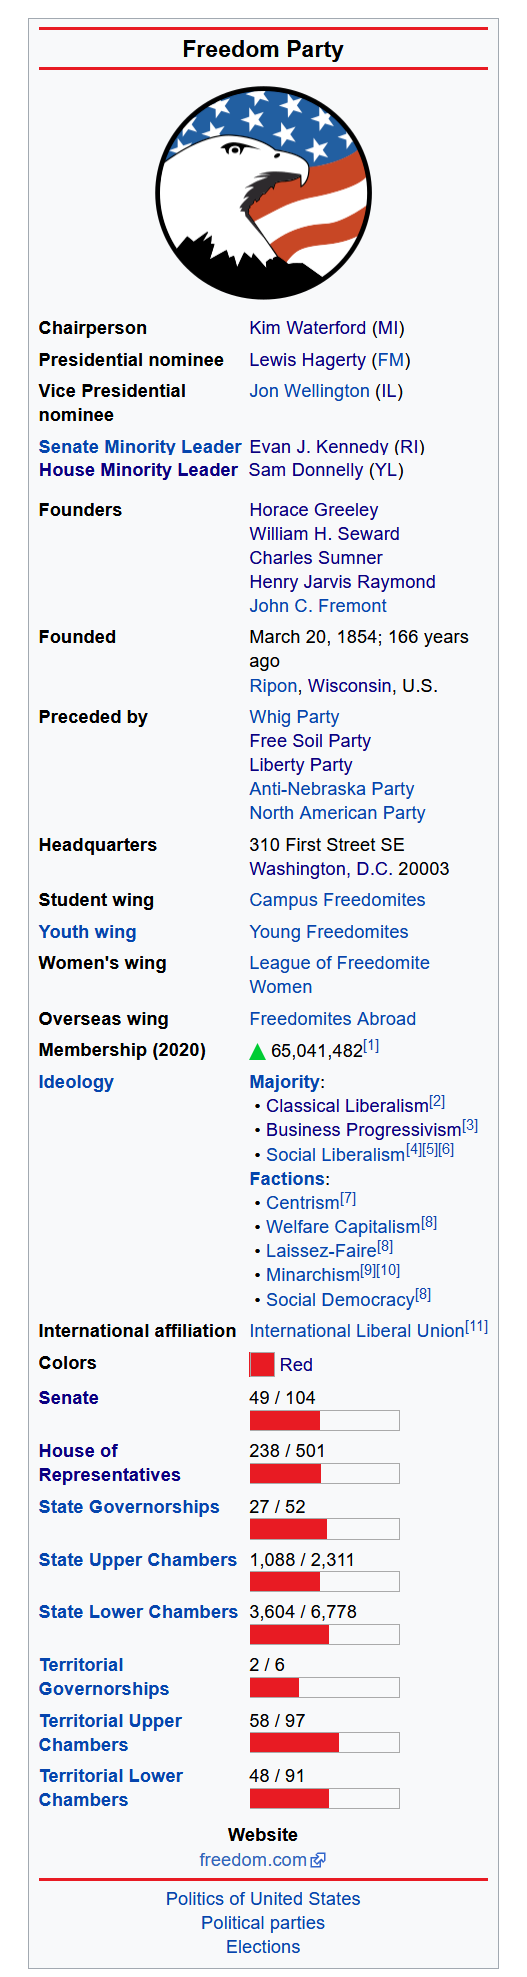 Freedom Party.png